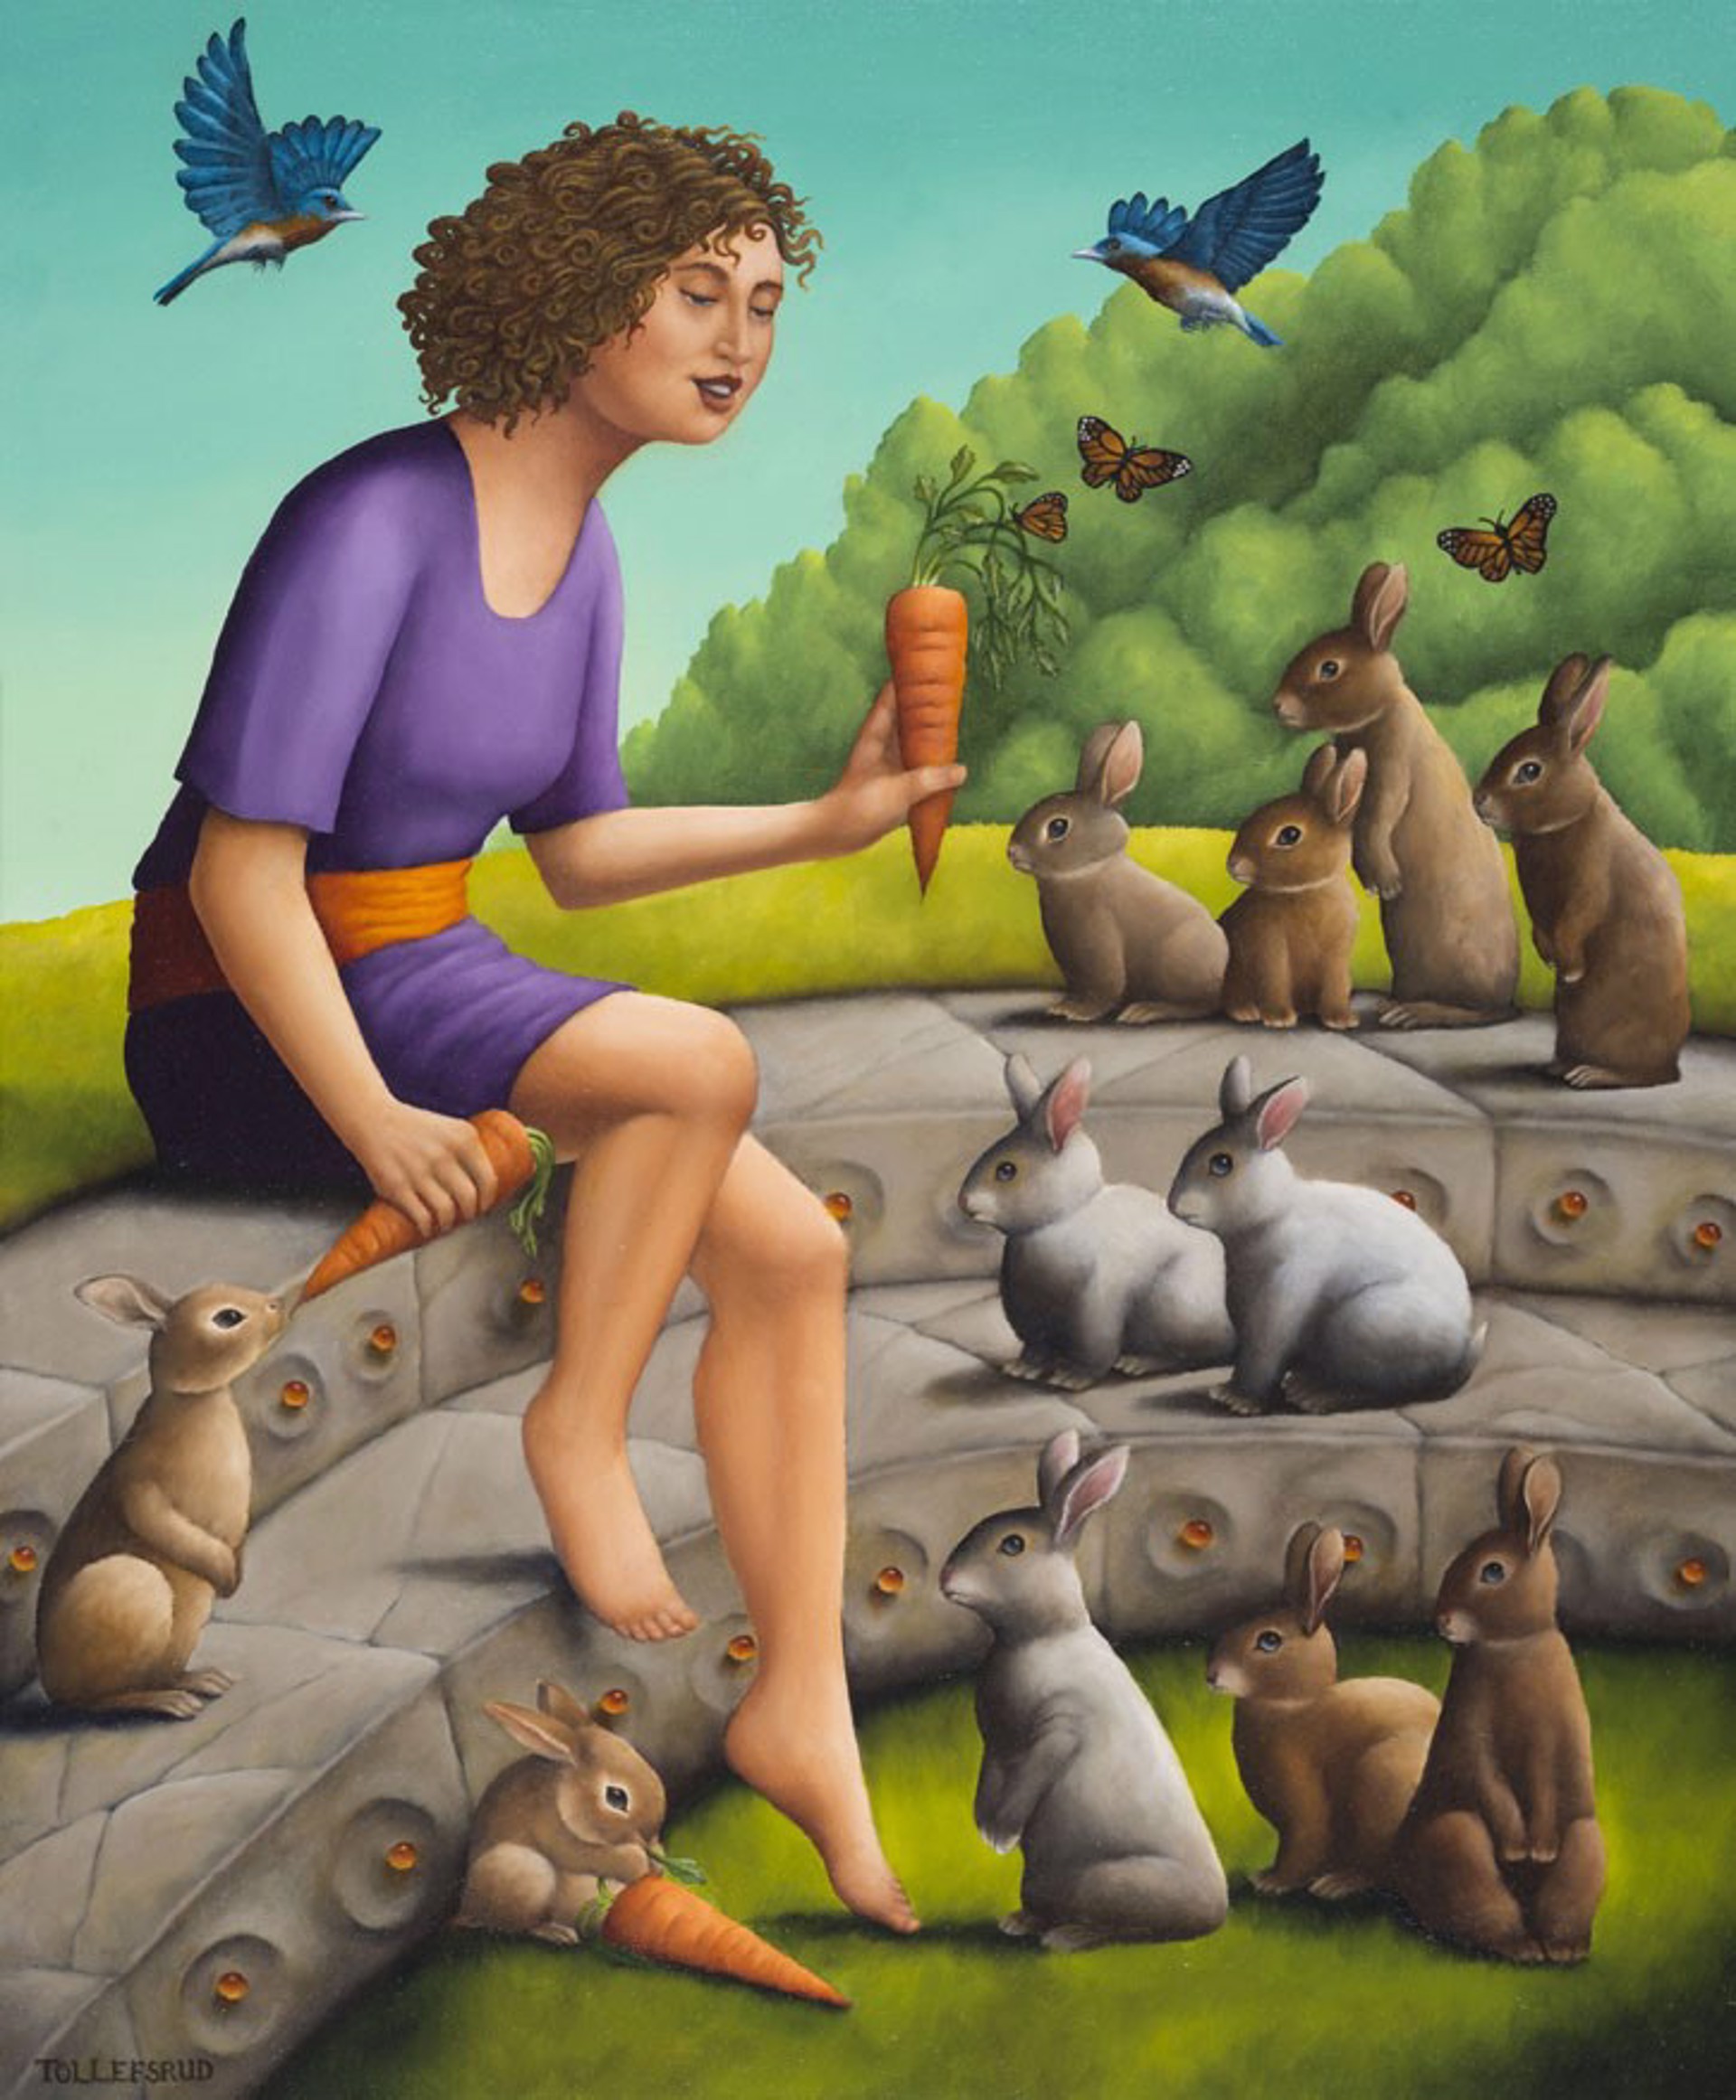 Beguiling the Bunnies by Cynthia Tollefsrud